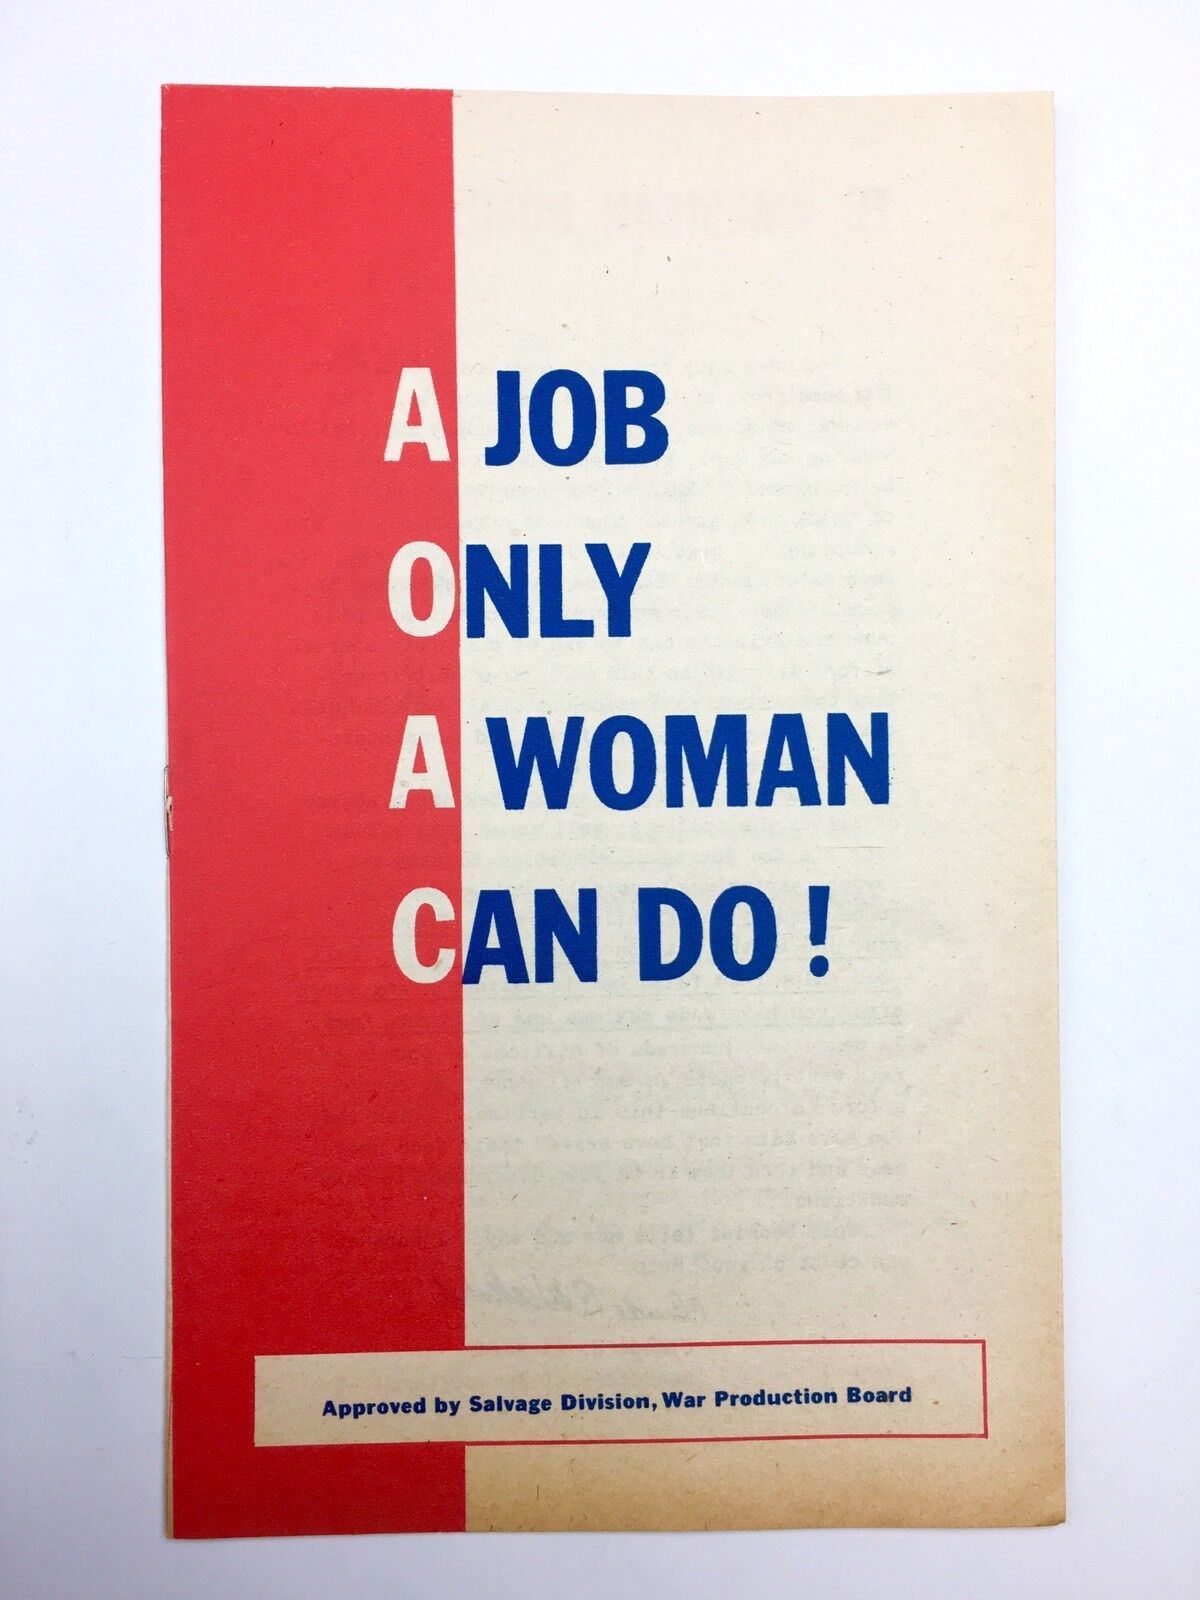 1943 WWII US War Dept Homefront Booklet A JOB ONLY A WOMAN CAN DO Save Waste Fat